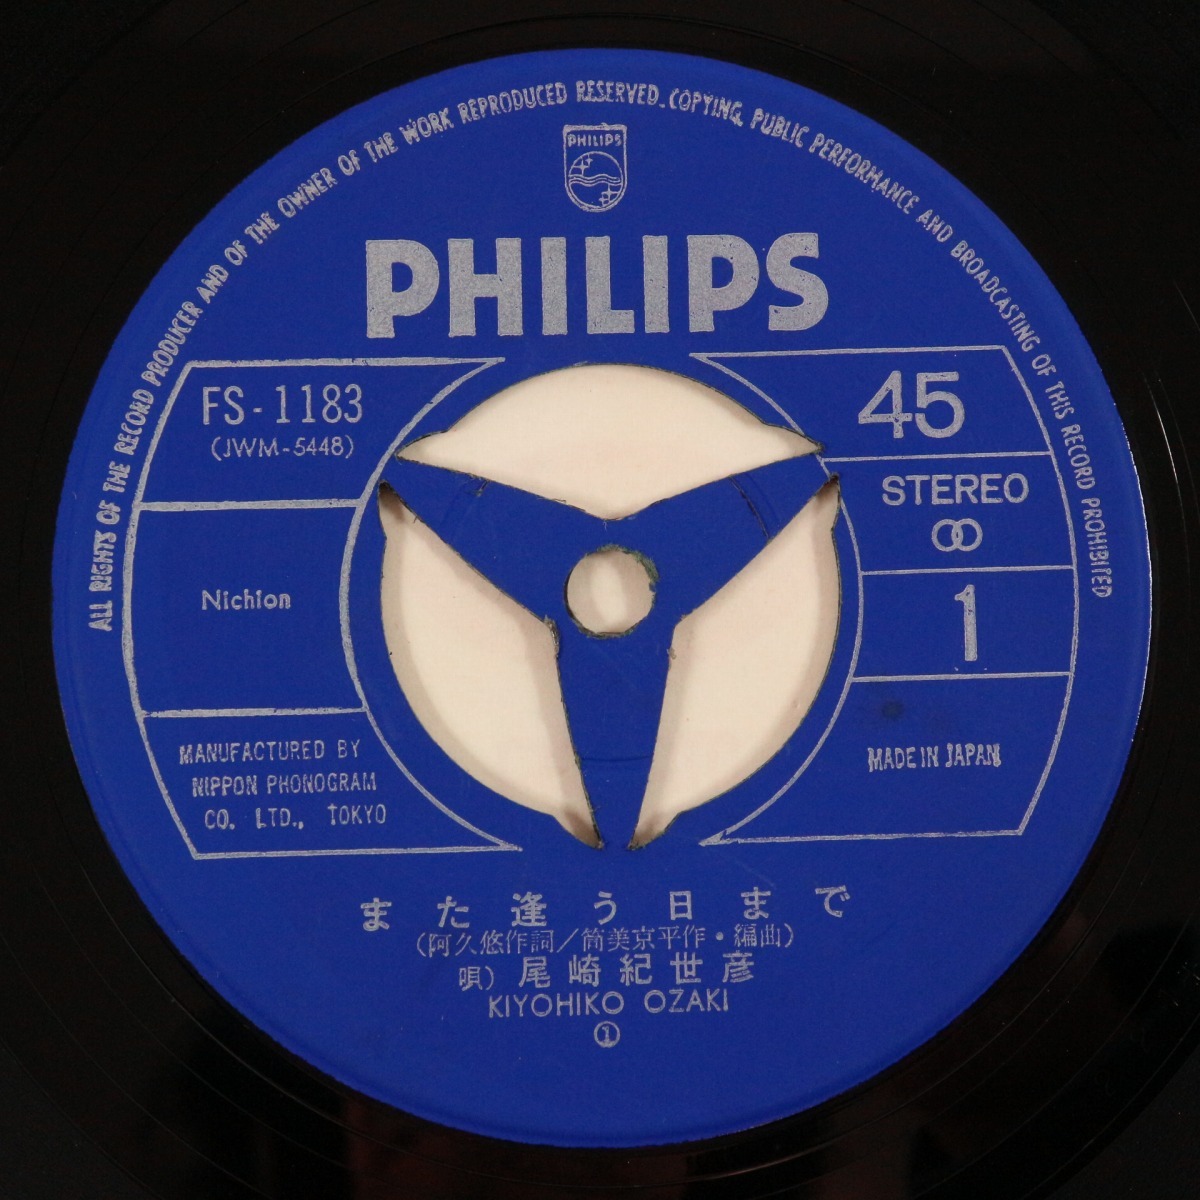 ◆EP◆尾崎紀世彦◆また逢う日まで/帰郷◆Philips FS-1183◆_画像4